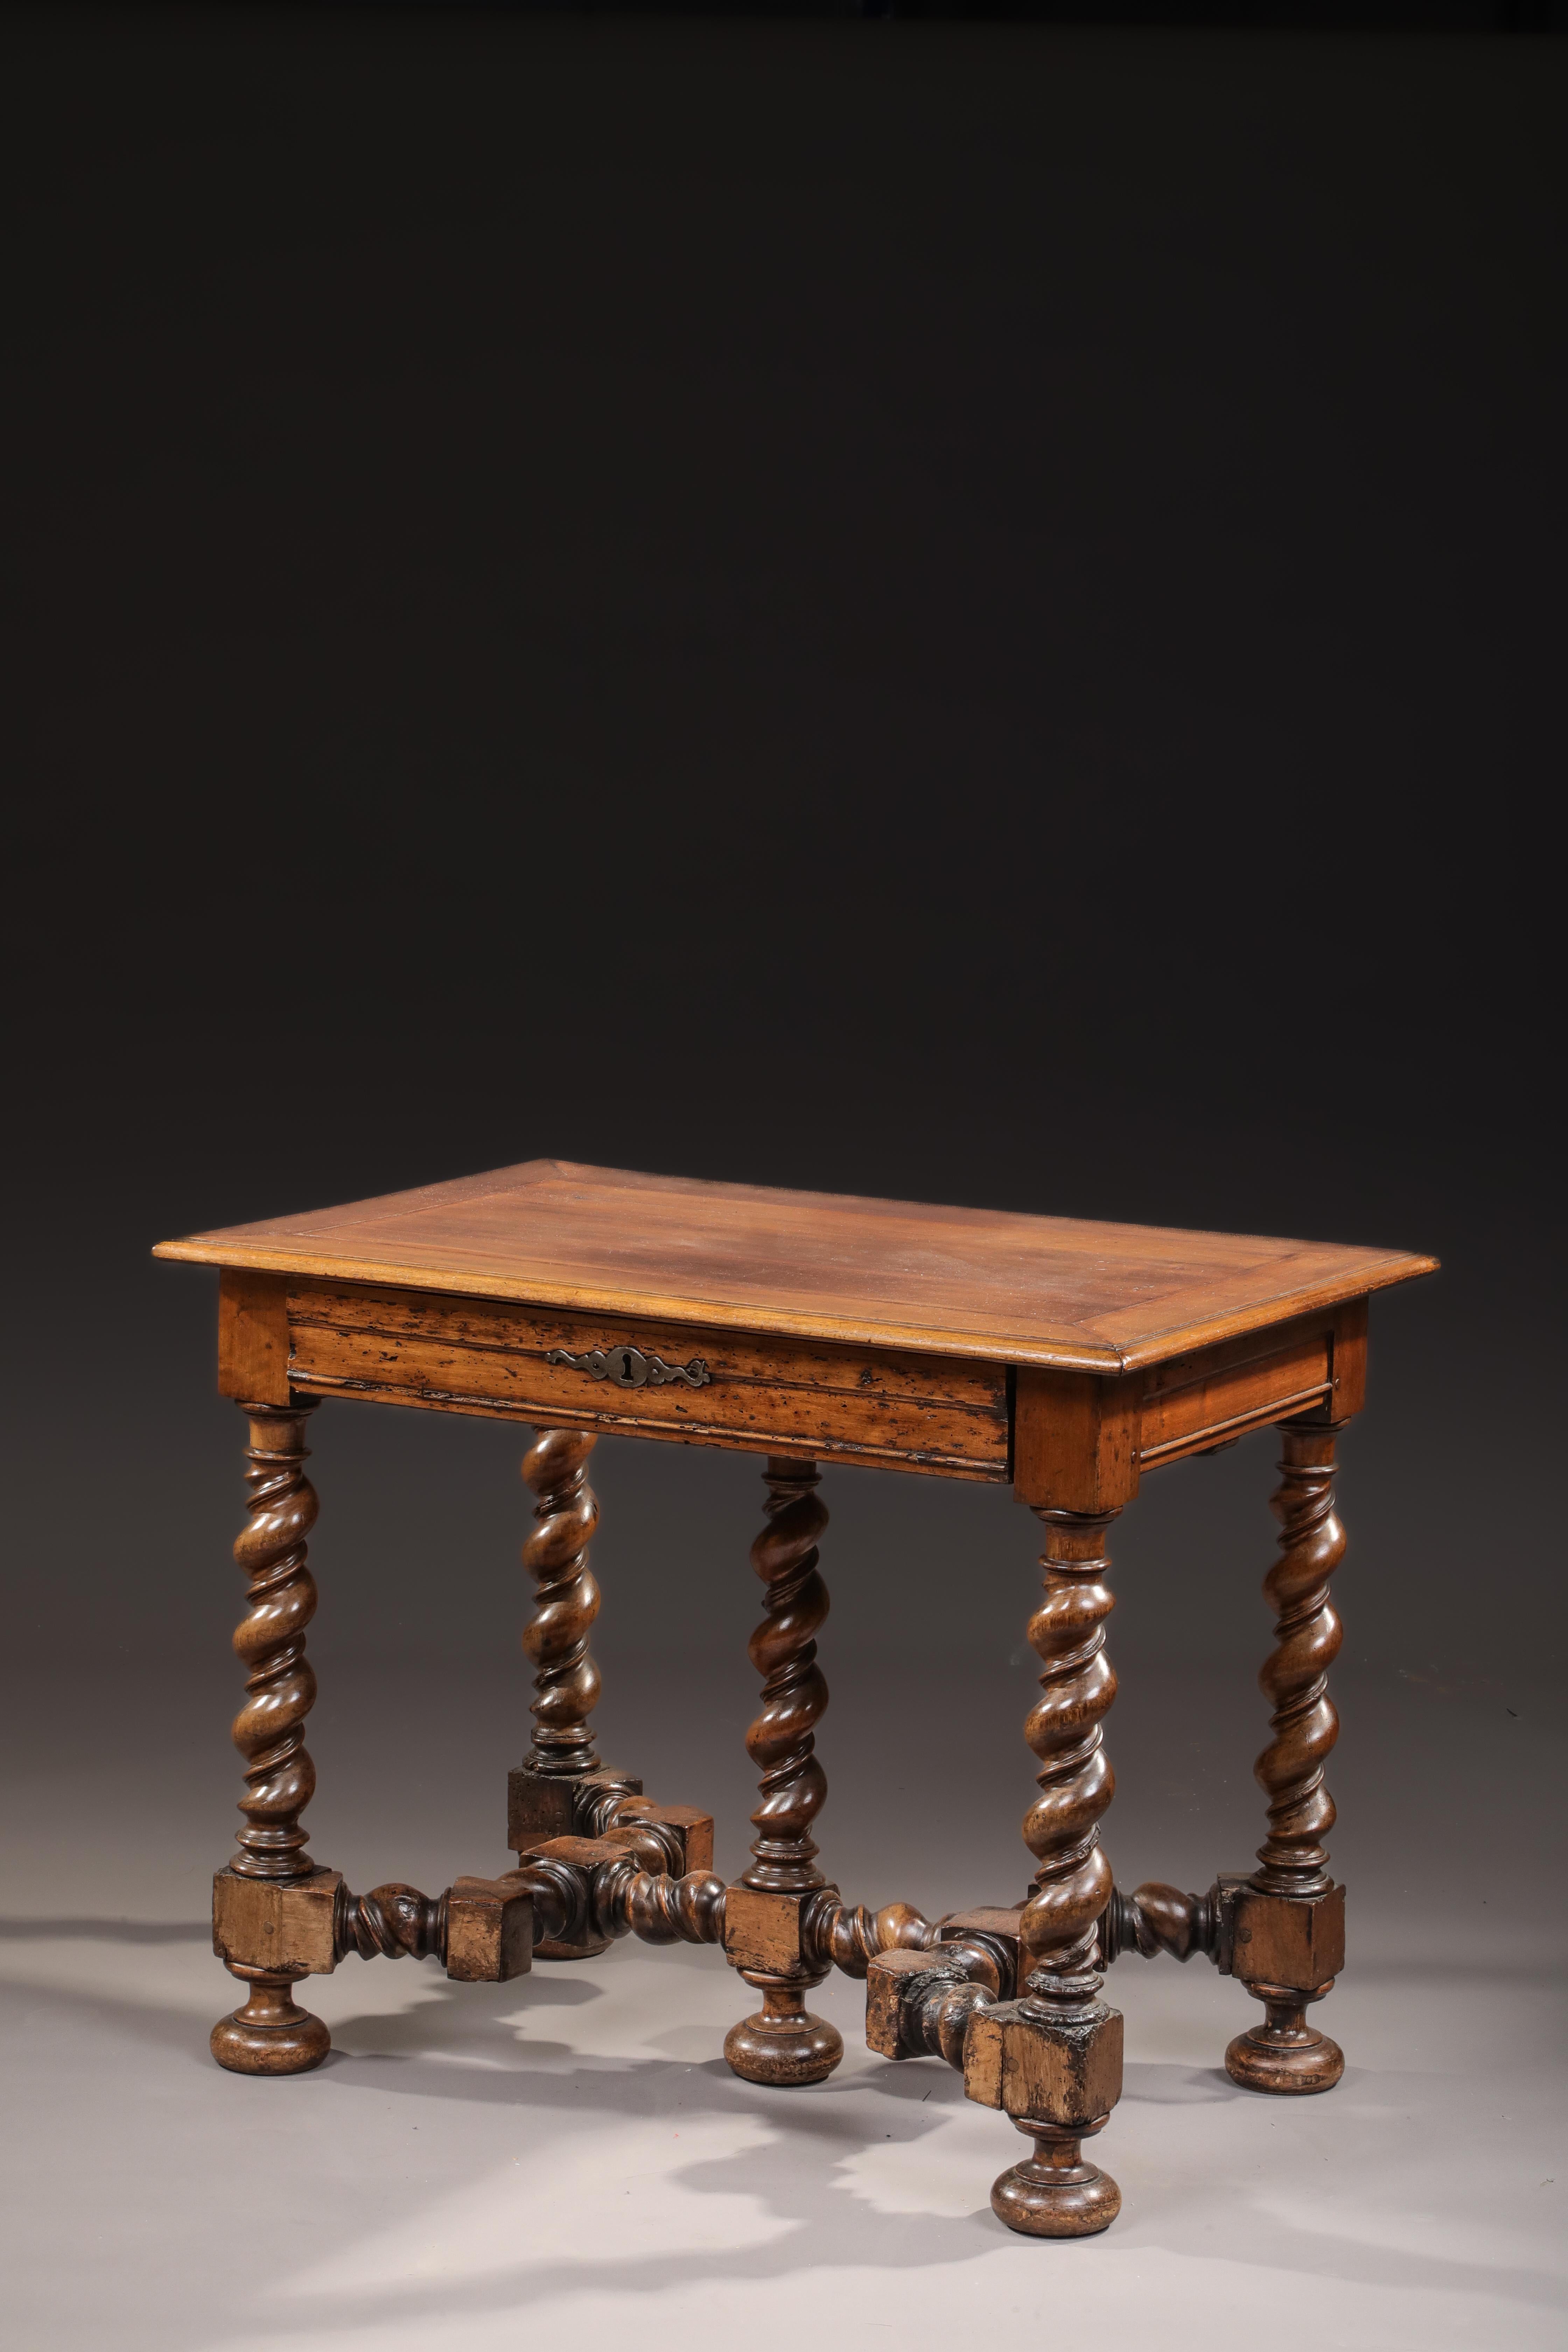 TABLE WITH TWISTED LEGS FROM THE LOUIS XIII PERIOD

ORIGIN: FRANCE
PERIOD: FIRST HALF OF THE 17th CENTURY

Height: 77 cm
Length: 96 cm 
Depth: 63 cm

Walnut wood


This very beautiful table in blond walnut wood, with a dense and tight grain, conveys